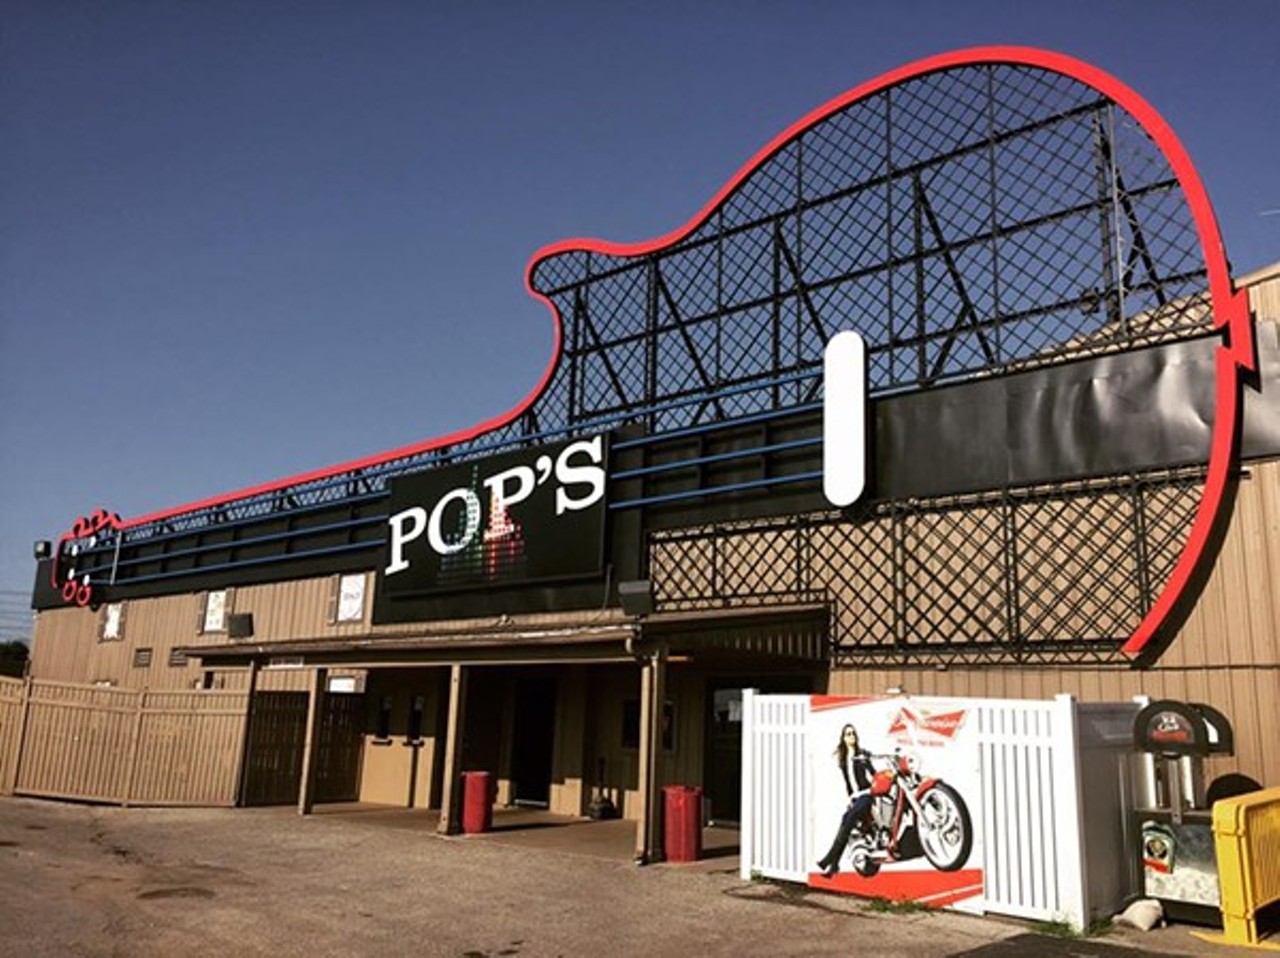 Pop's NightClub & Concert Venue
(401 Monsanto Avenue, Sauget, Illinois; 618-274-6720)
Open "24/7 since 1981" (but closed Sundays from 11 p.m through 8:30 a.m. Monday morning)
Time has no meaning at Pop&#146;s Nightclub. Lesser bars may concern themselves with things like &#147;closing time&#148; and &#147;last call&#148; &#151; not Pop&#146;s. Open 24 hours every day but Sunday, this Sauget spot is for day-drinkers and night-drinkers and everything-in-betweeners.
Photo credit: Courtesy of Ryan Kelley